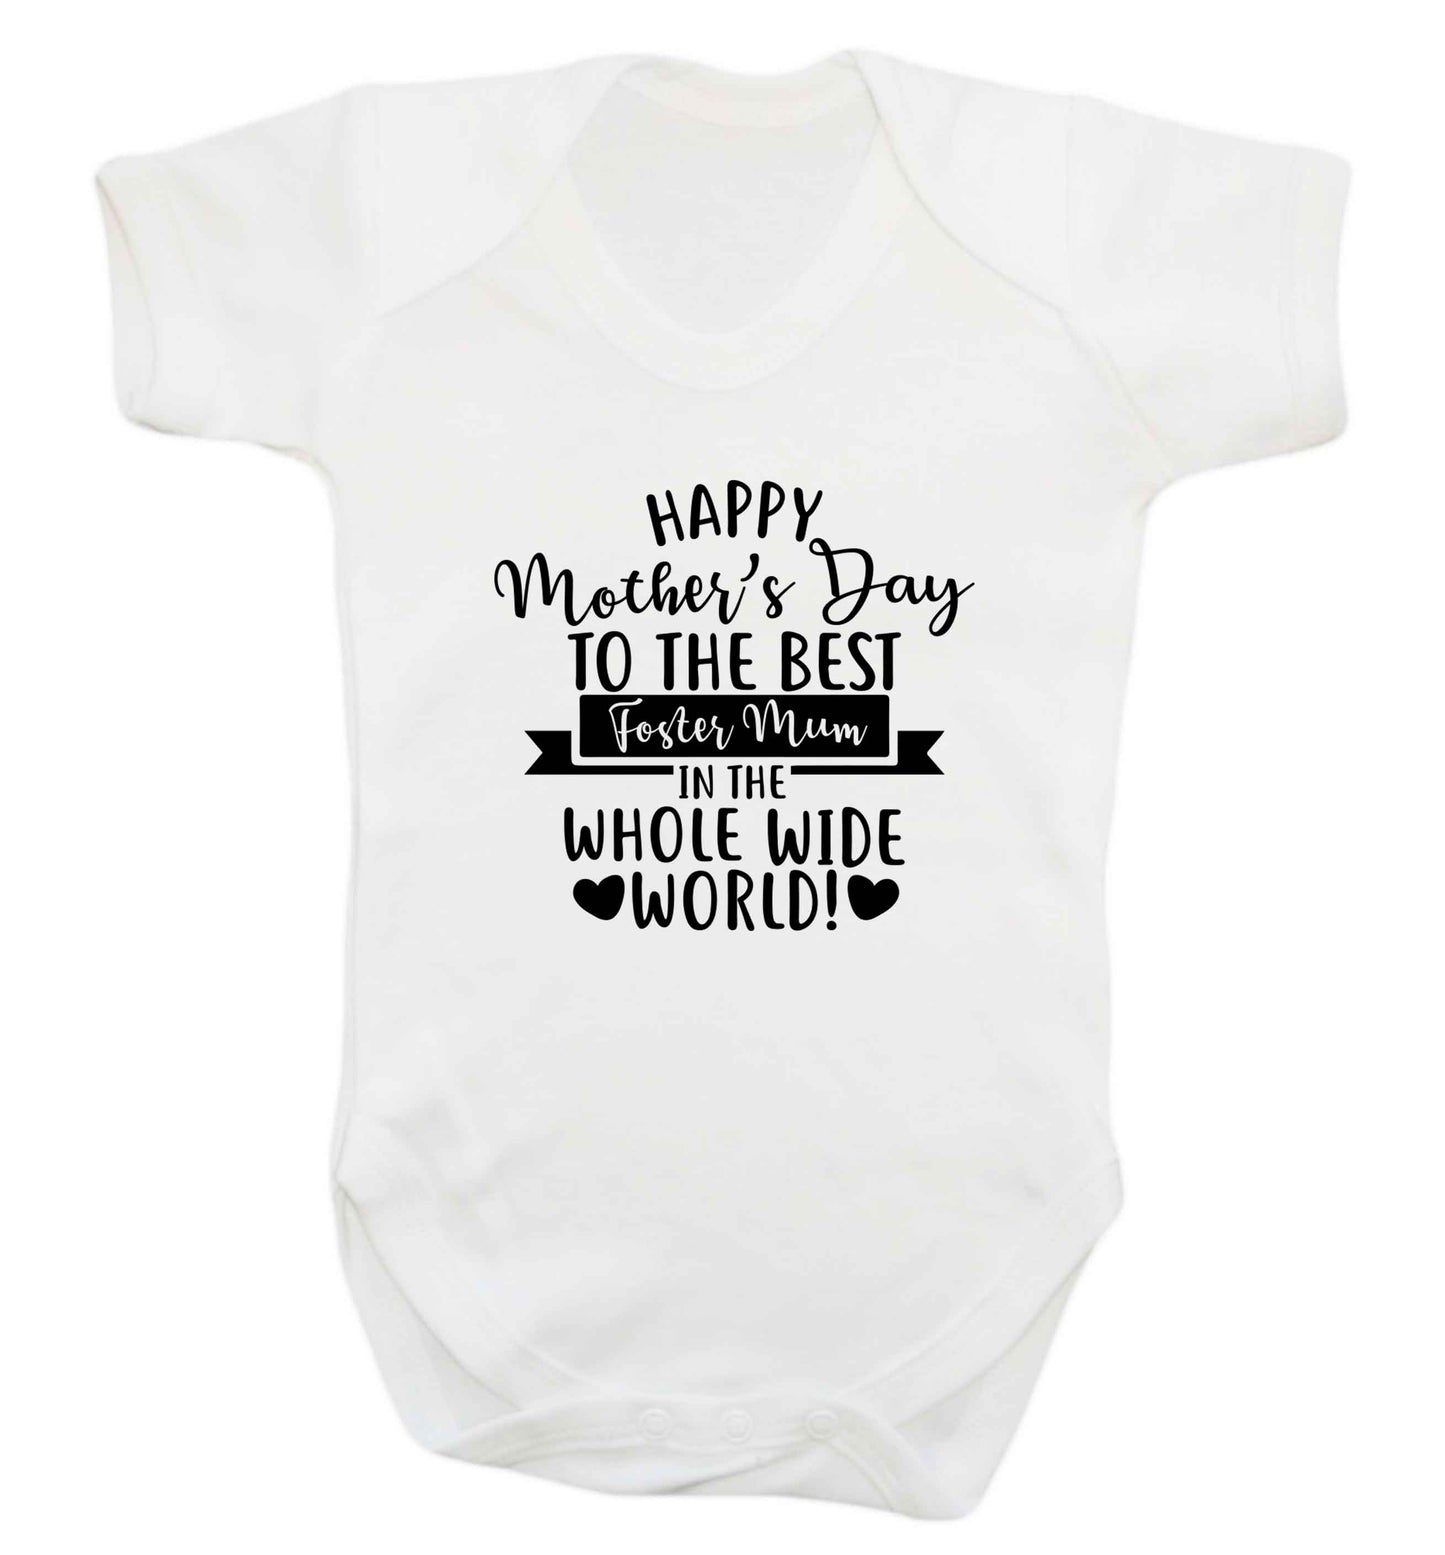 Happy mother's day to the best foster mum in the world baby vest white 18-24 months